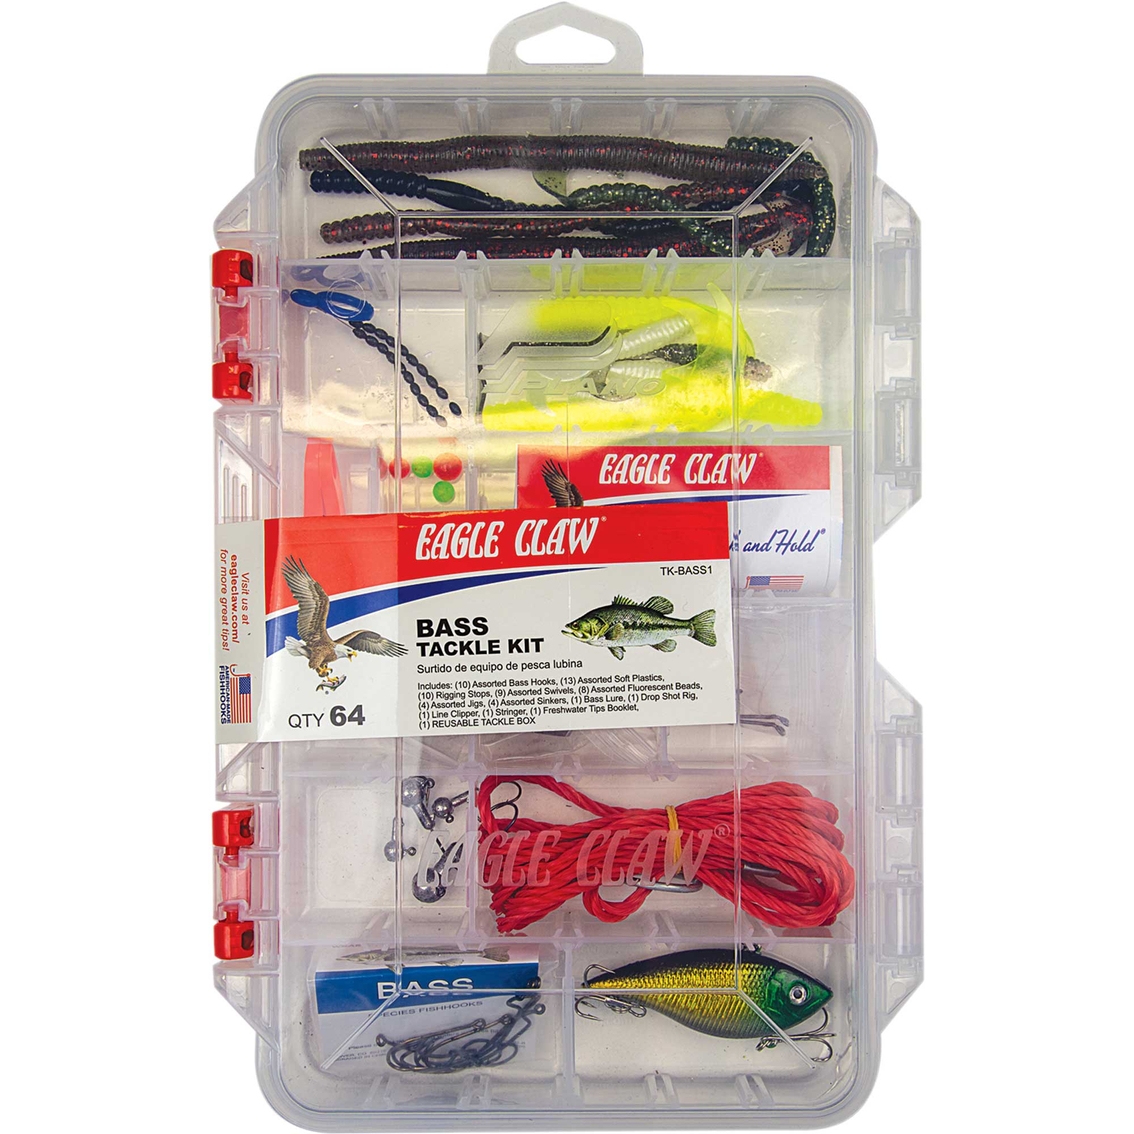 Eagle Claw 55 Pc. Bass Tackle Kit, Fishing Accessories, Sports & Outdoors